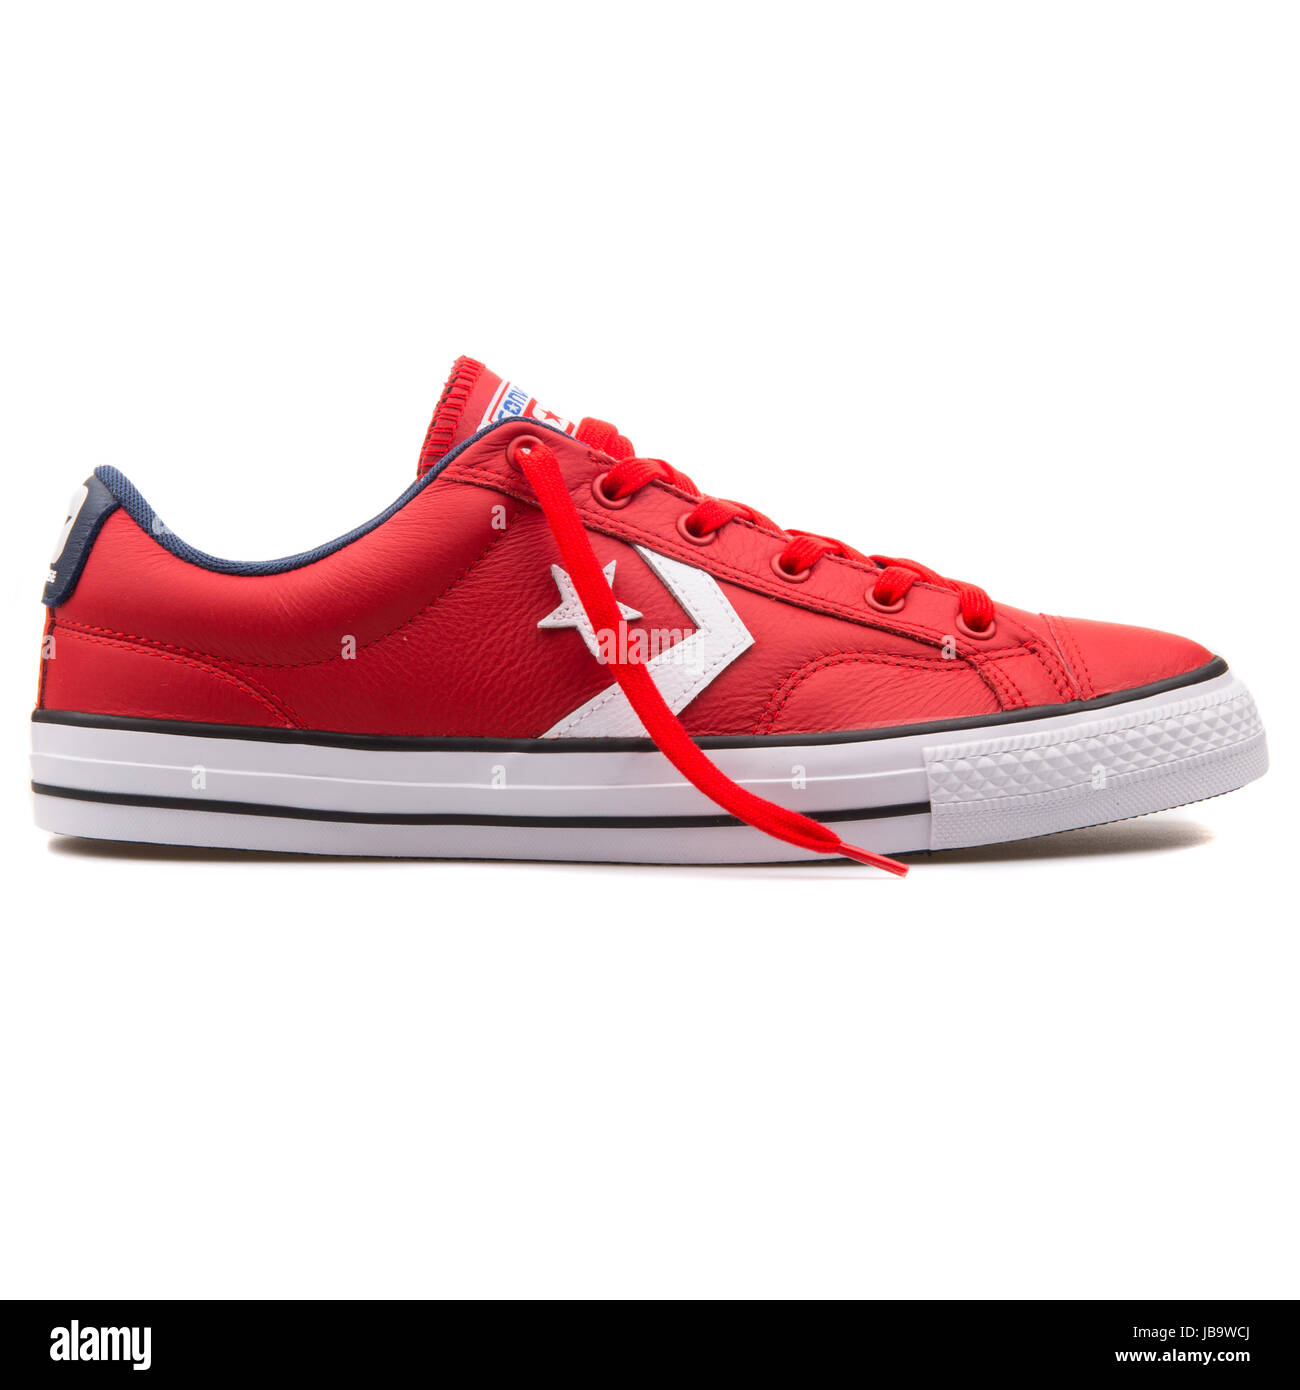 Converse Chuck Taylor All Star OX rouge et blanc Chaussures unisexe - 149770C Photo Stock - Alamy